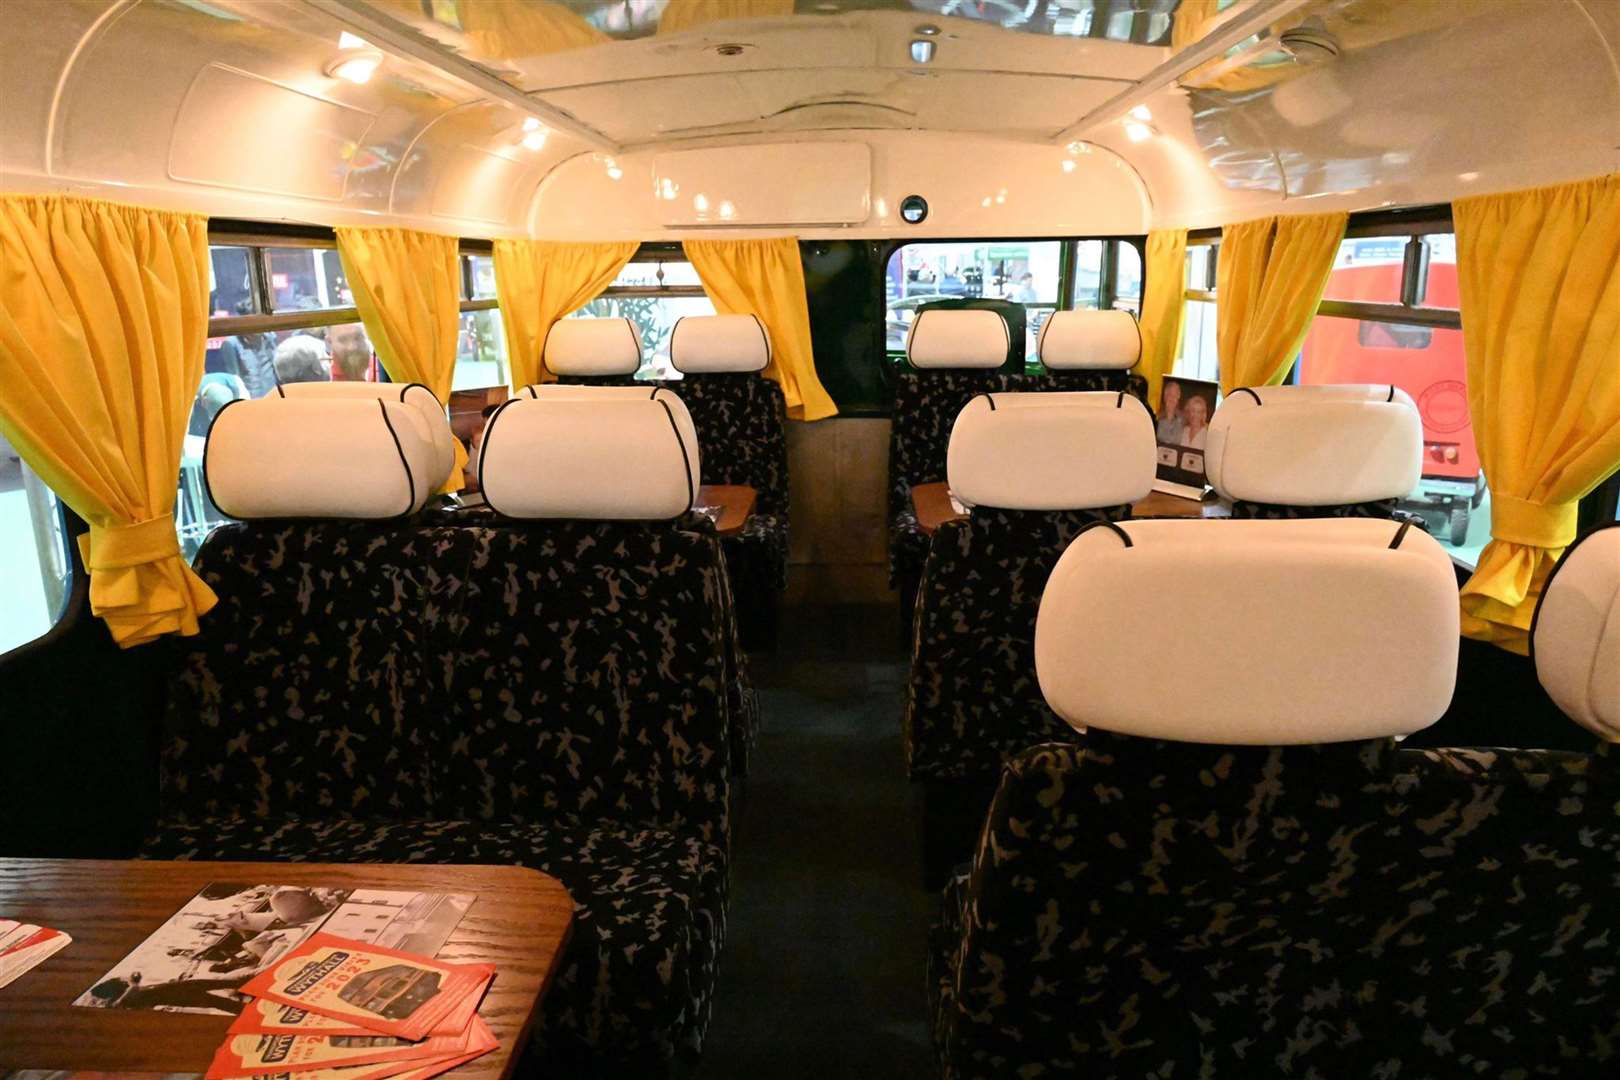 The bus has undergone years of renovation (Julien’s Auctions/PA)